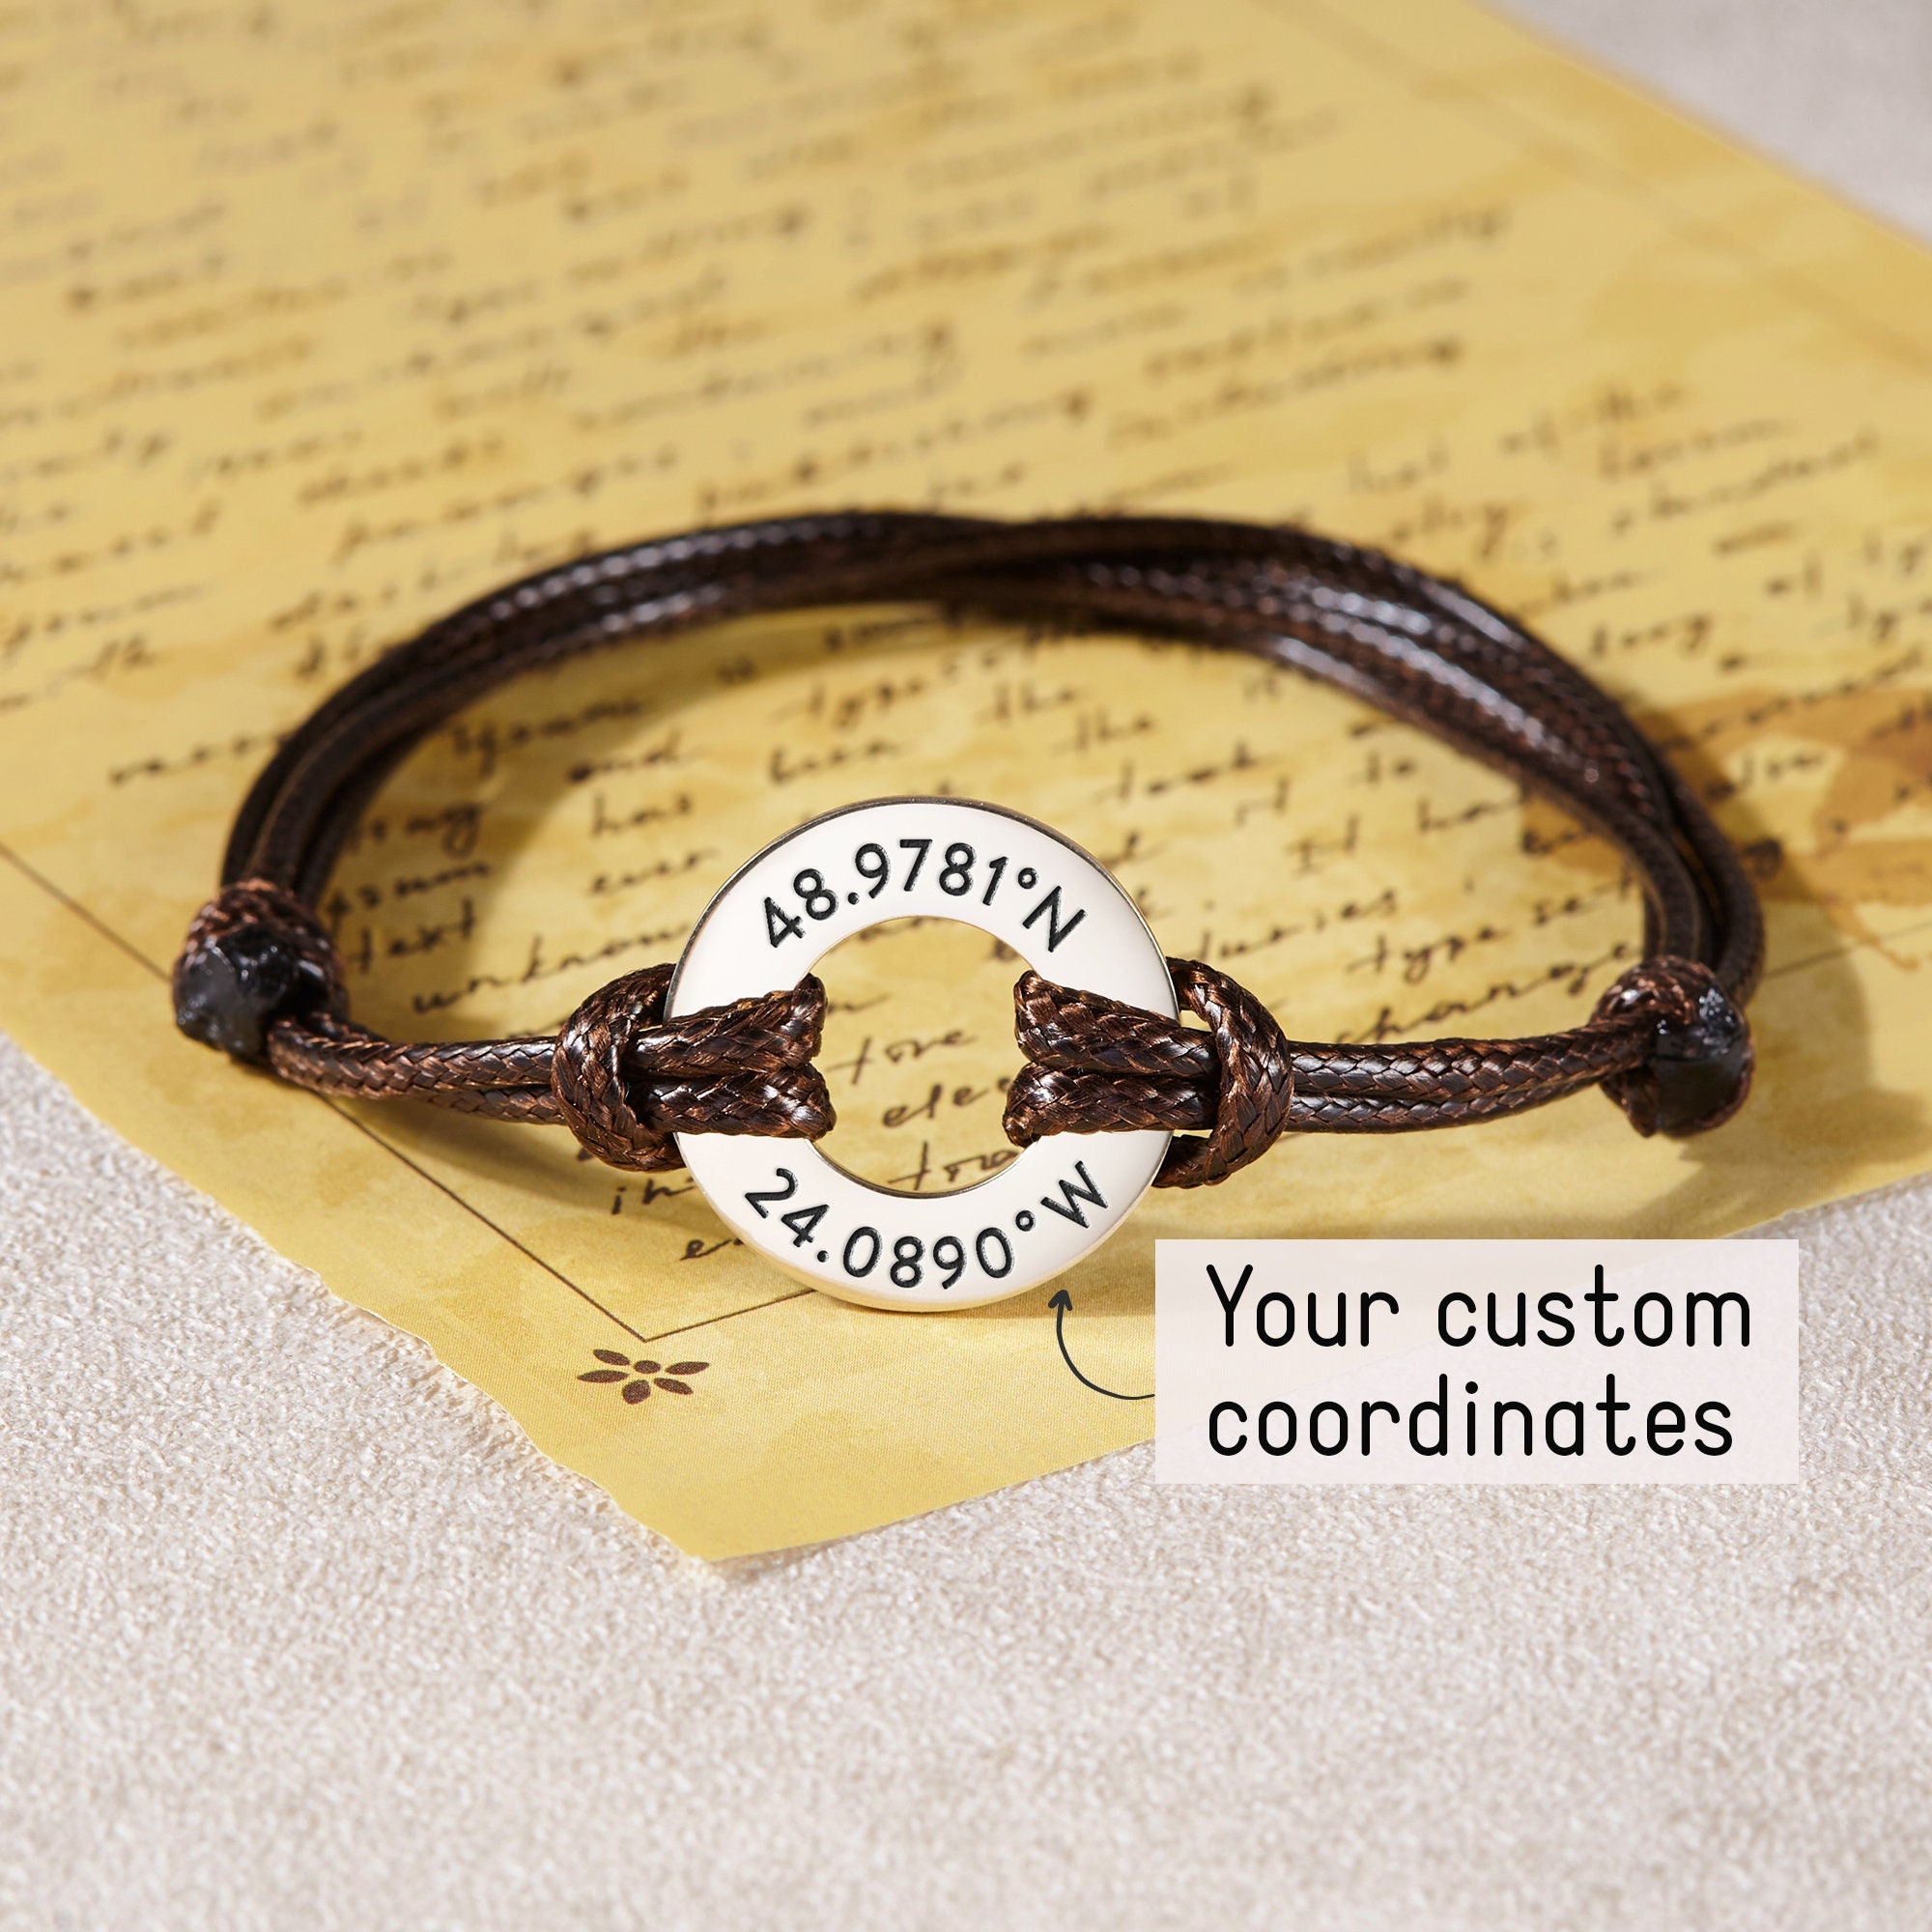  Handmade Matching Bracelets for Couple Personalized Hidden  Message - Engraved Customized Initials Symbols Emoji : Handmade Products